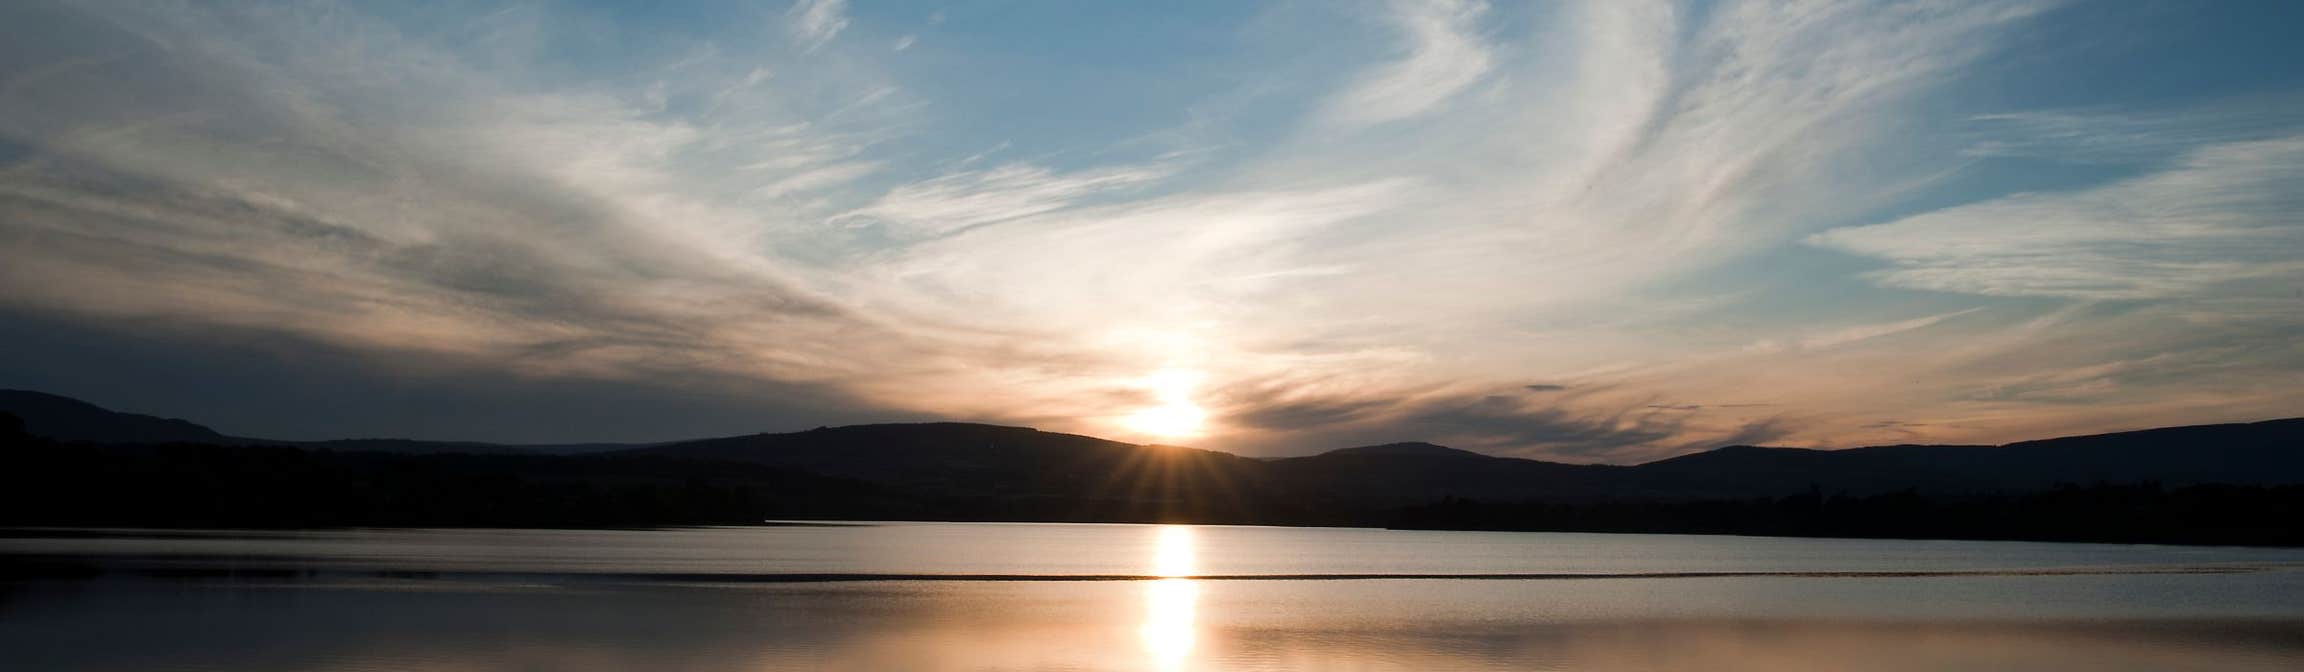 Image of the sunsetting in Roundwood in County Wicklow